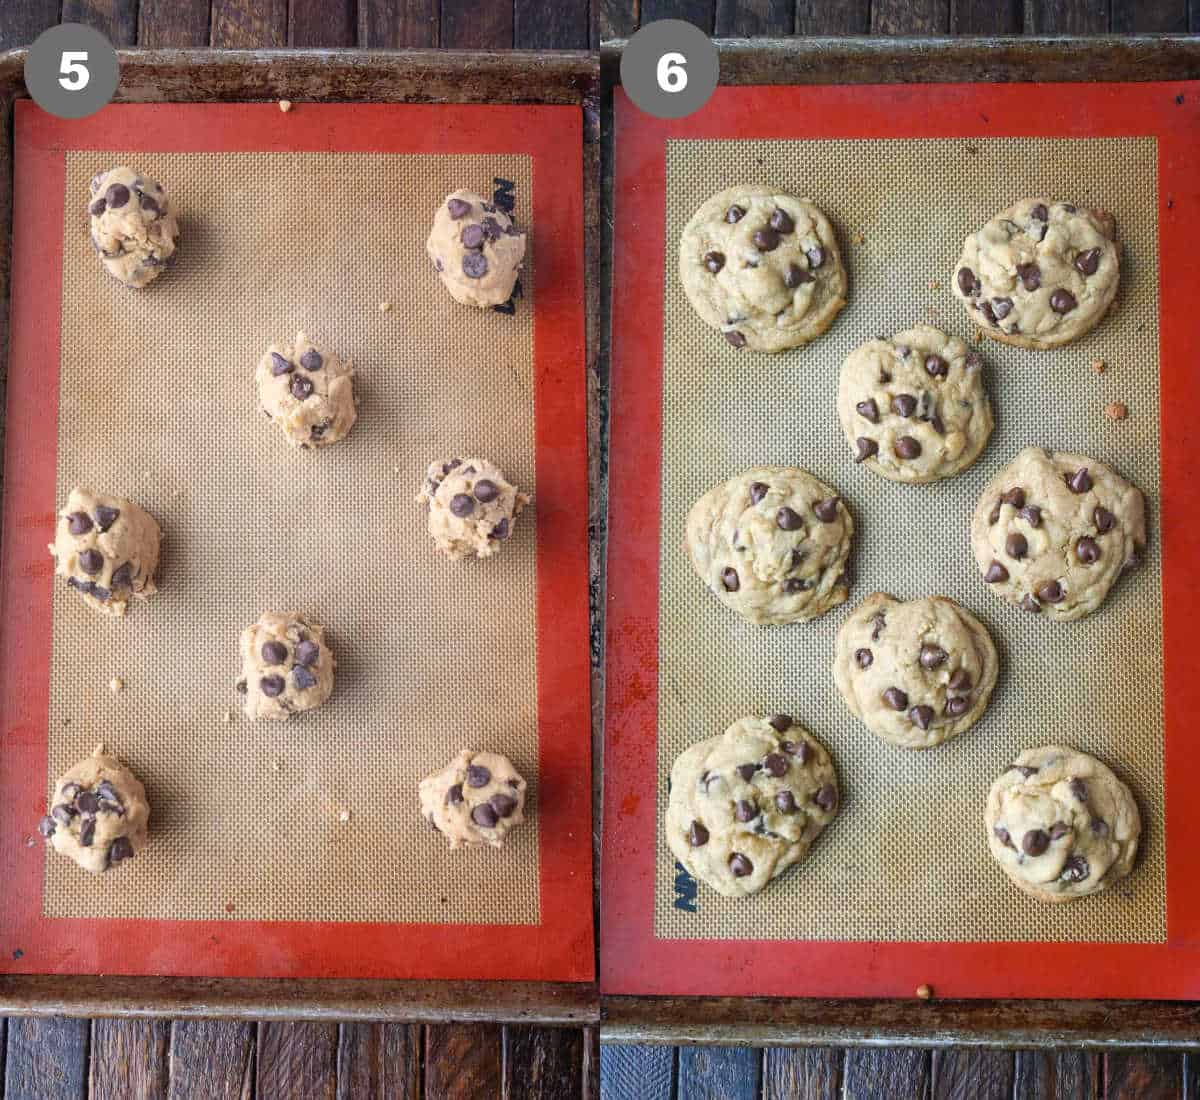 Chocolate chip dough balls placed on a baking sheet and baked.